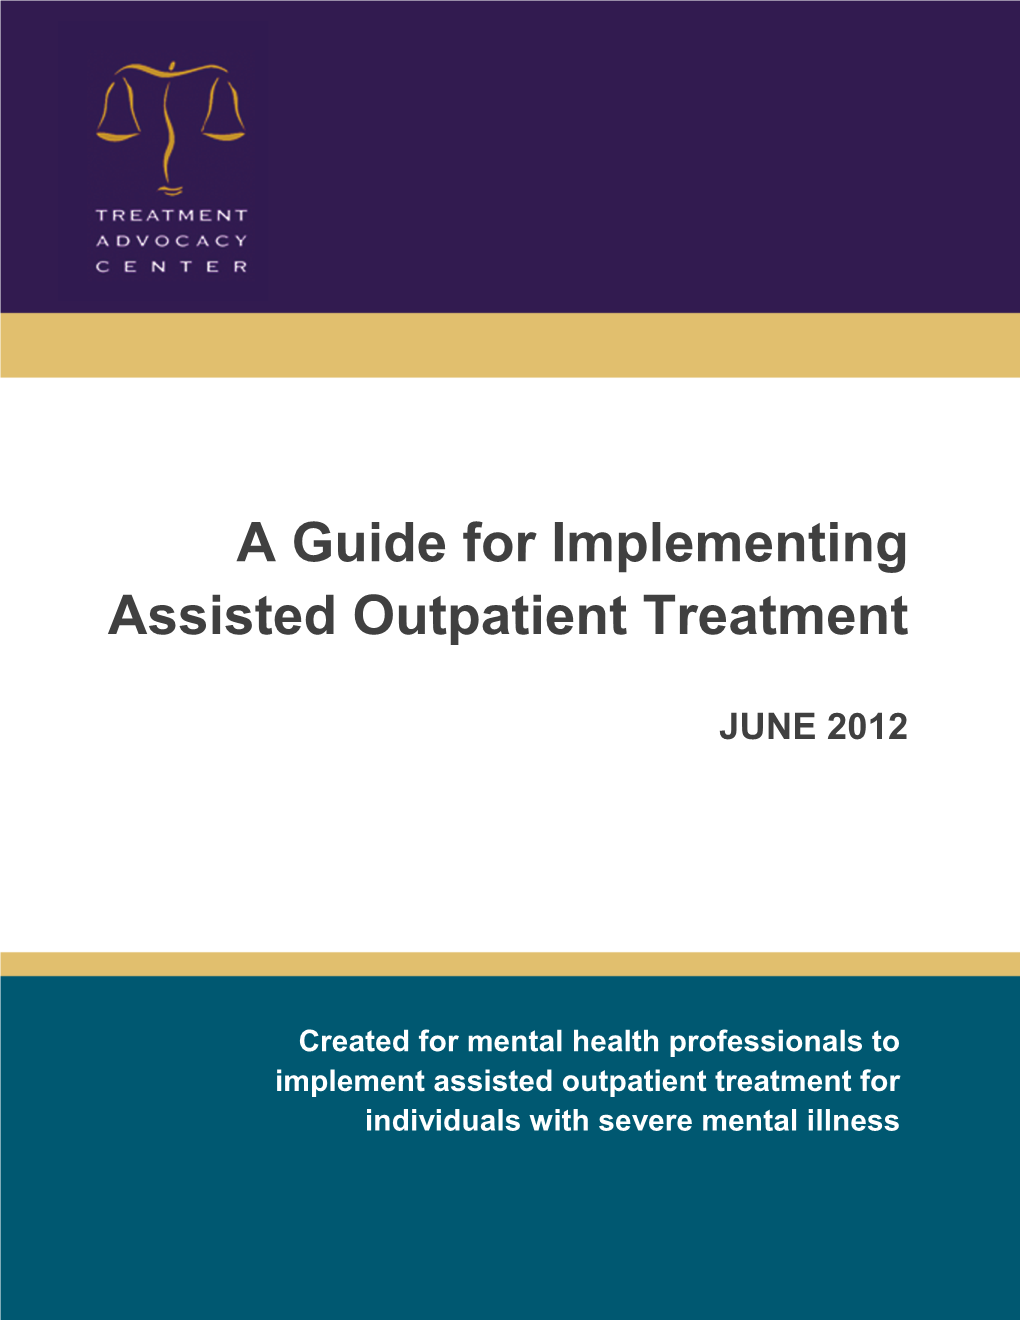 A Guide for Implementing Assisted Outpatient Treatment